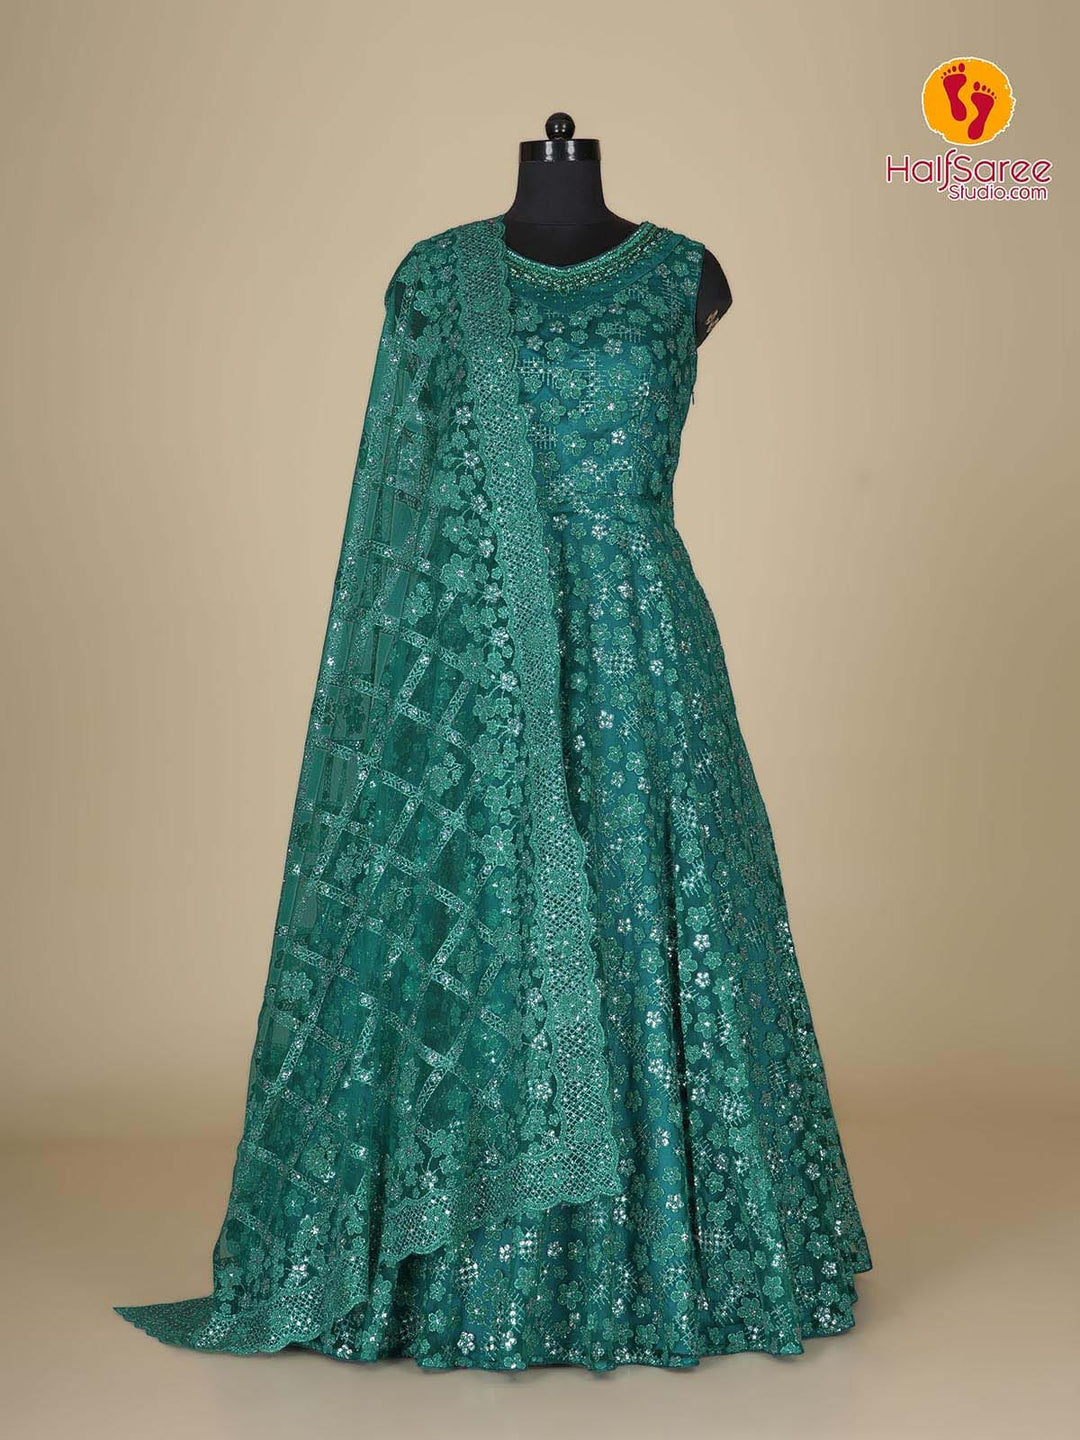 Net Gown designed with embroidered workRama